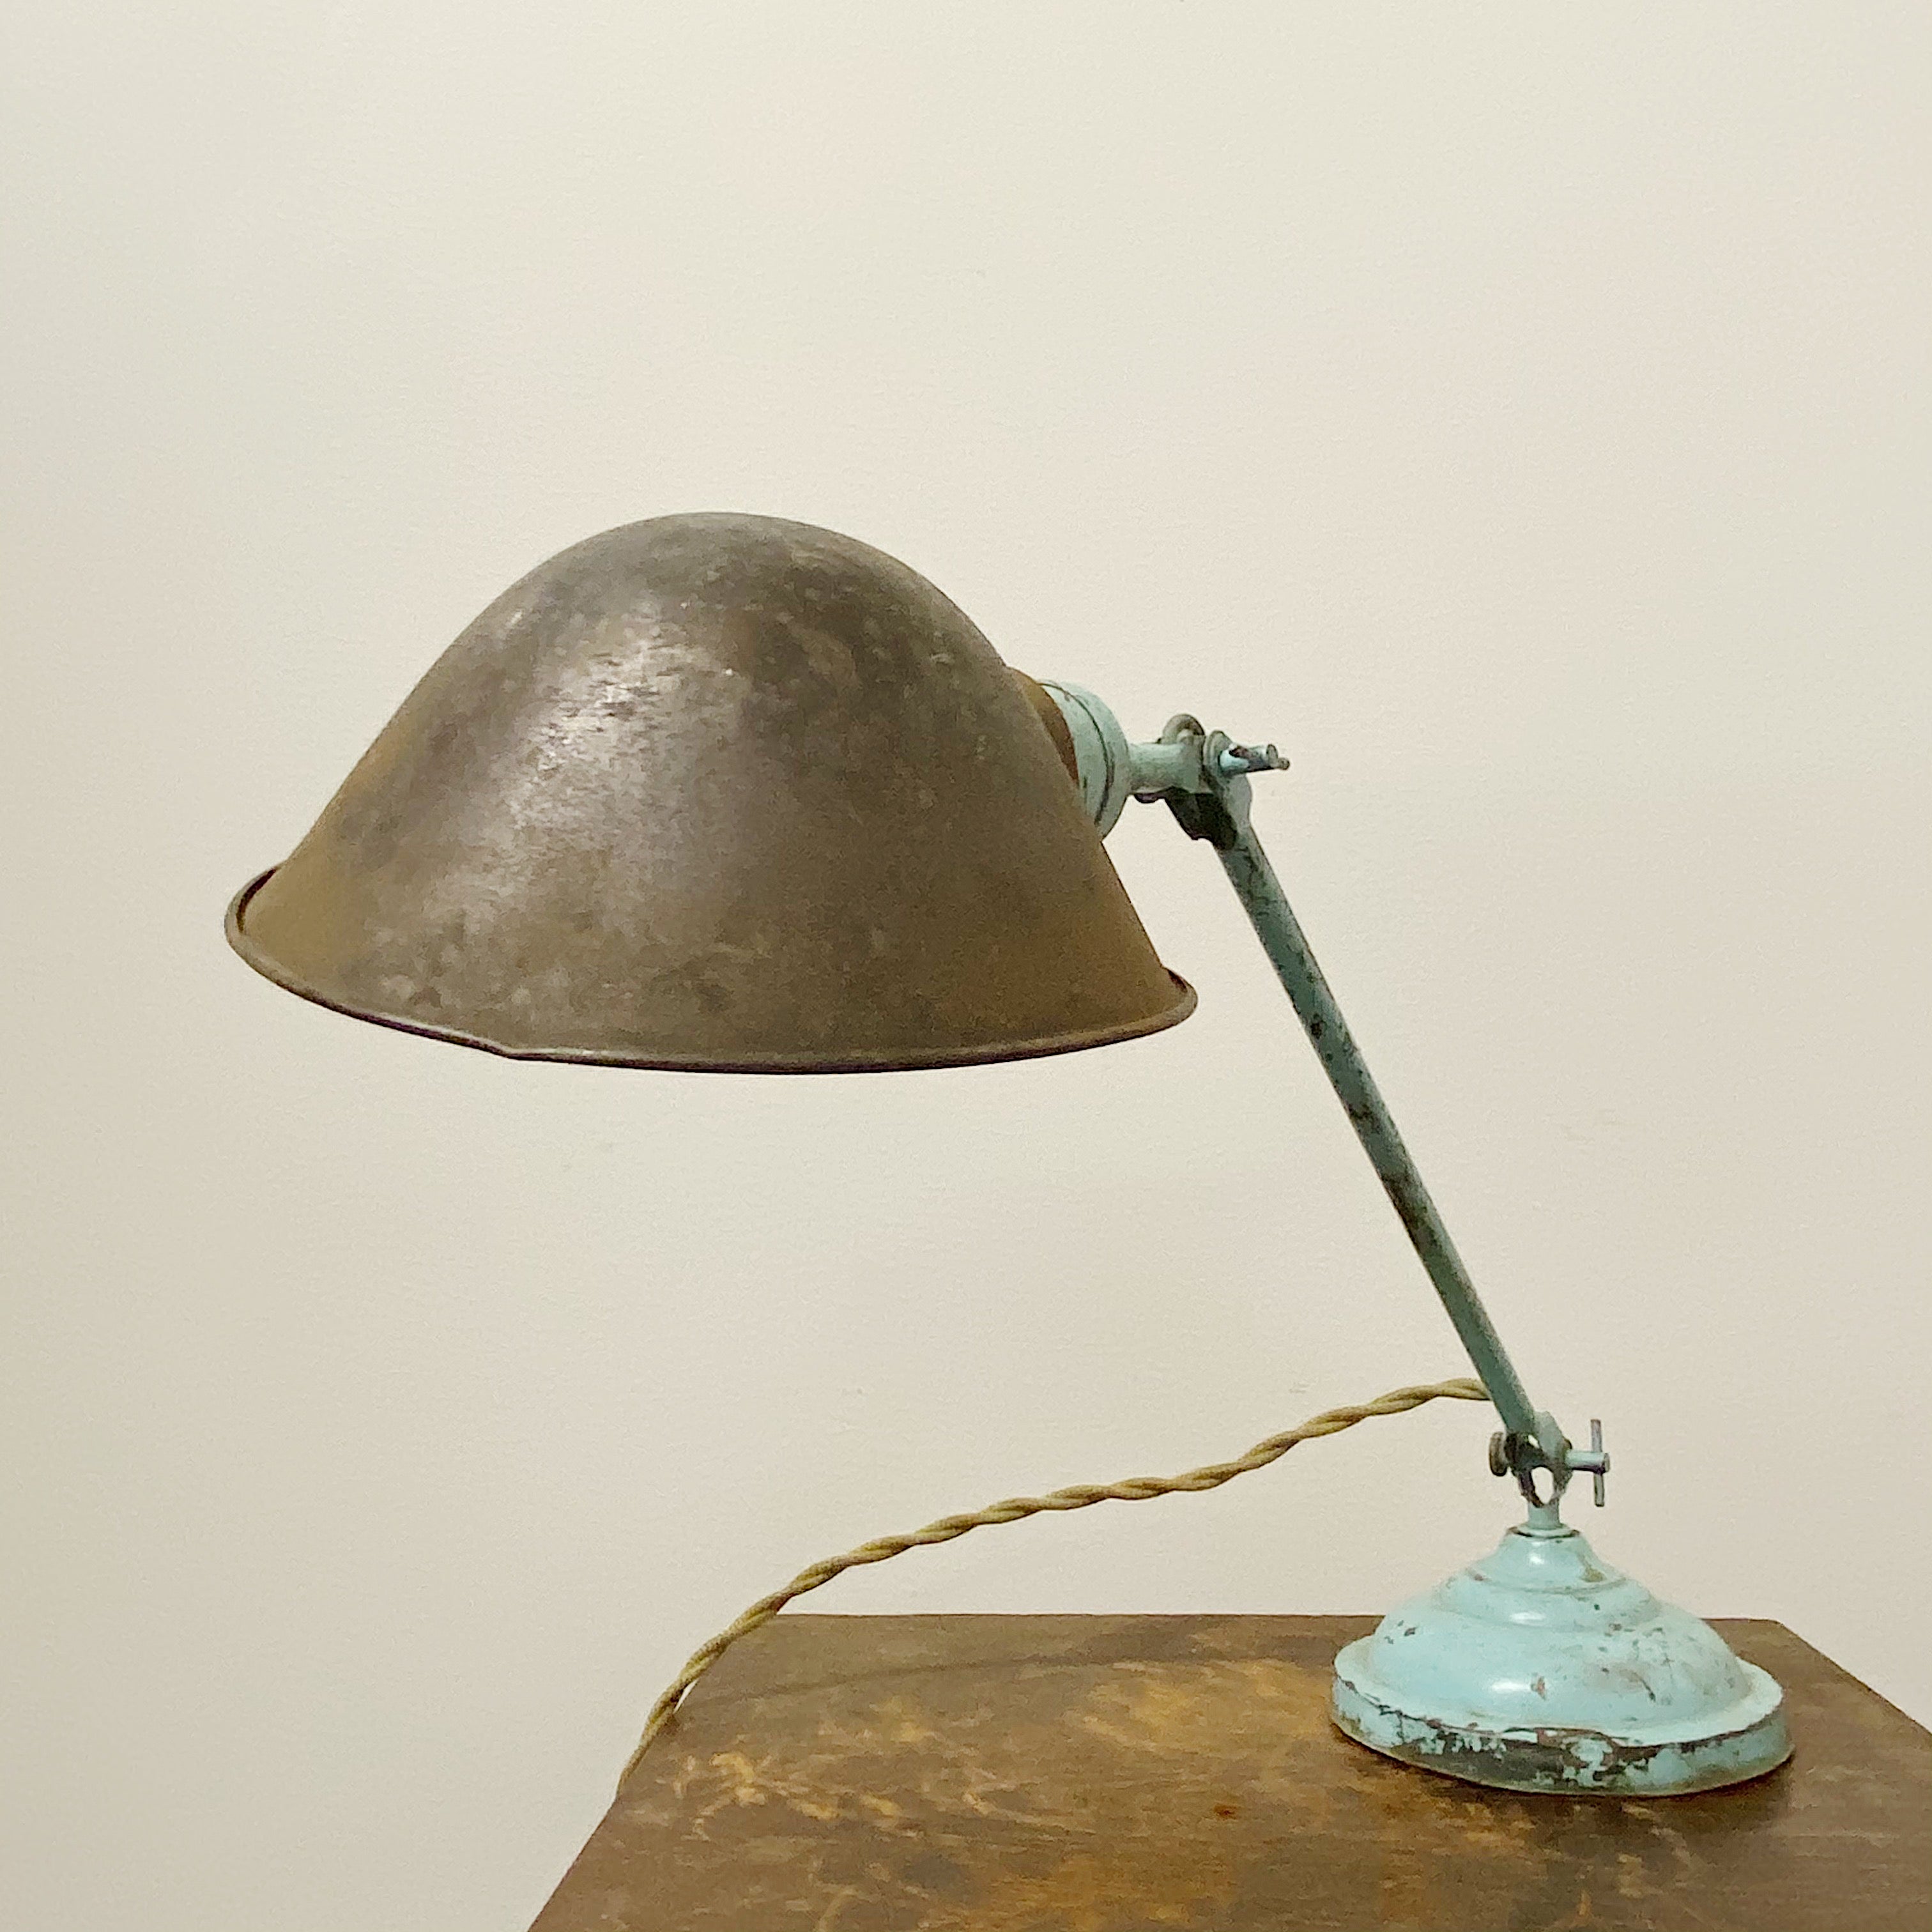 Front view of Faries Articulating Lamp with Light Blue Base - Early 1900s Industrial Table Light - Rare Antique Telescoping Desk Lamp - Cool Lamps